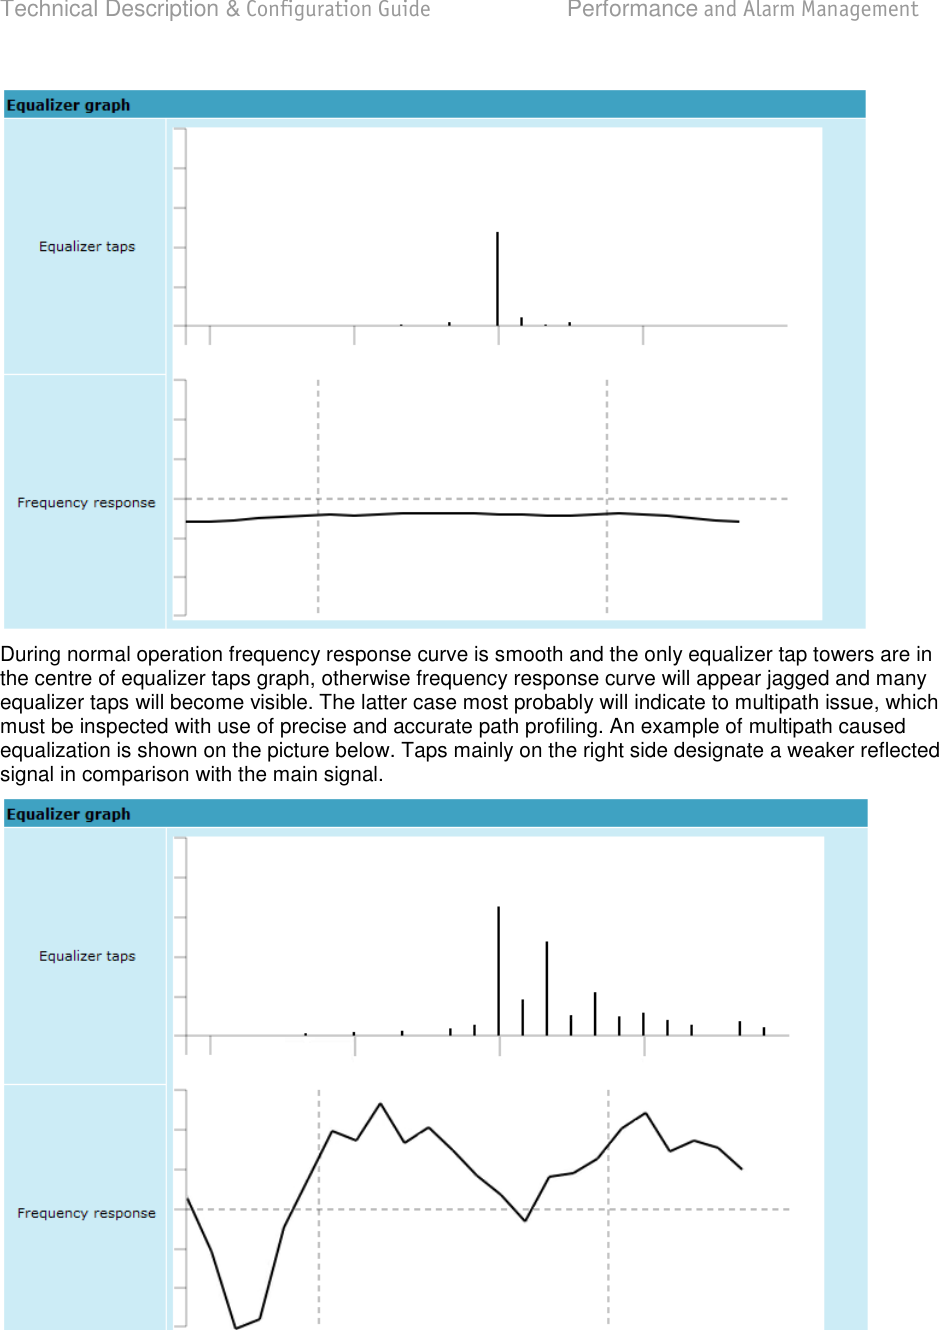 Technical Description &amp; Configuration Guide  Performance and Alarm Management  LigoWave  Page 71  During normal operation frequency response curve is smooth and the only equalizer tap towers are in the centre of equalizer taps graph, otherwise frequency response curve will appear jagged and many equalizer taps will become visible. The latter case most probably will indicate to multipath issue, which must be inspected with use of precise and accurate path profiling. An example of multipath caused equalization is shown on the picture below. Taps mainly on the right side designate a weaker reflected signal in comparison with the main signal.      